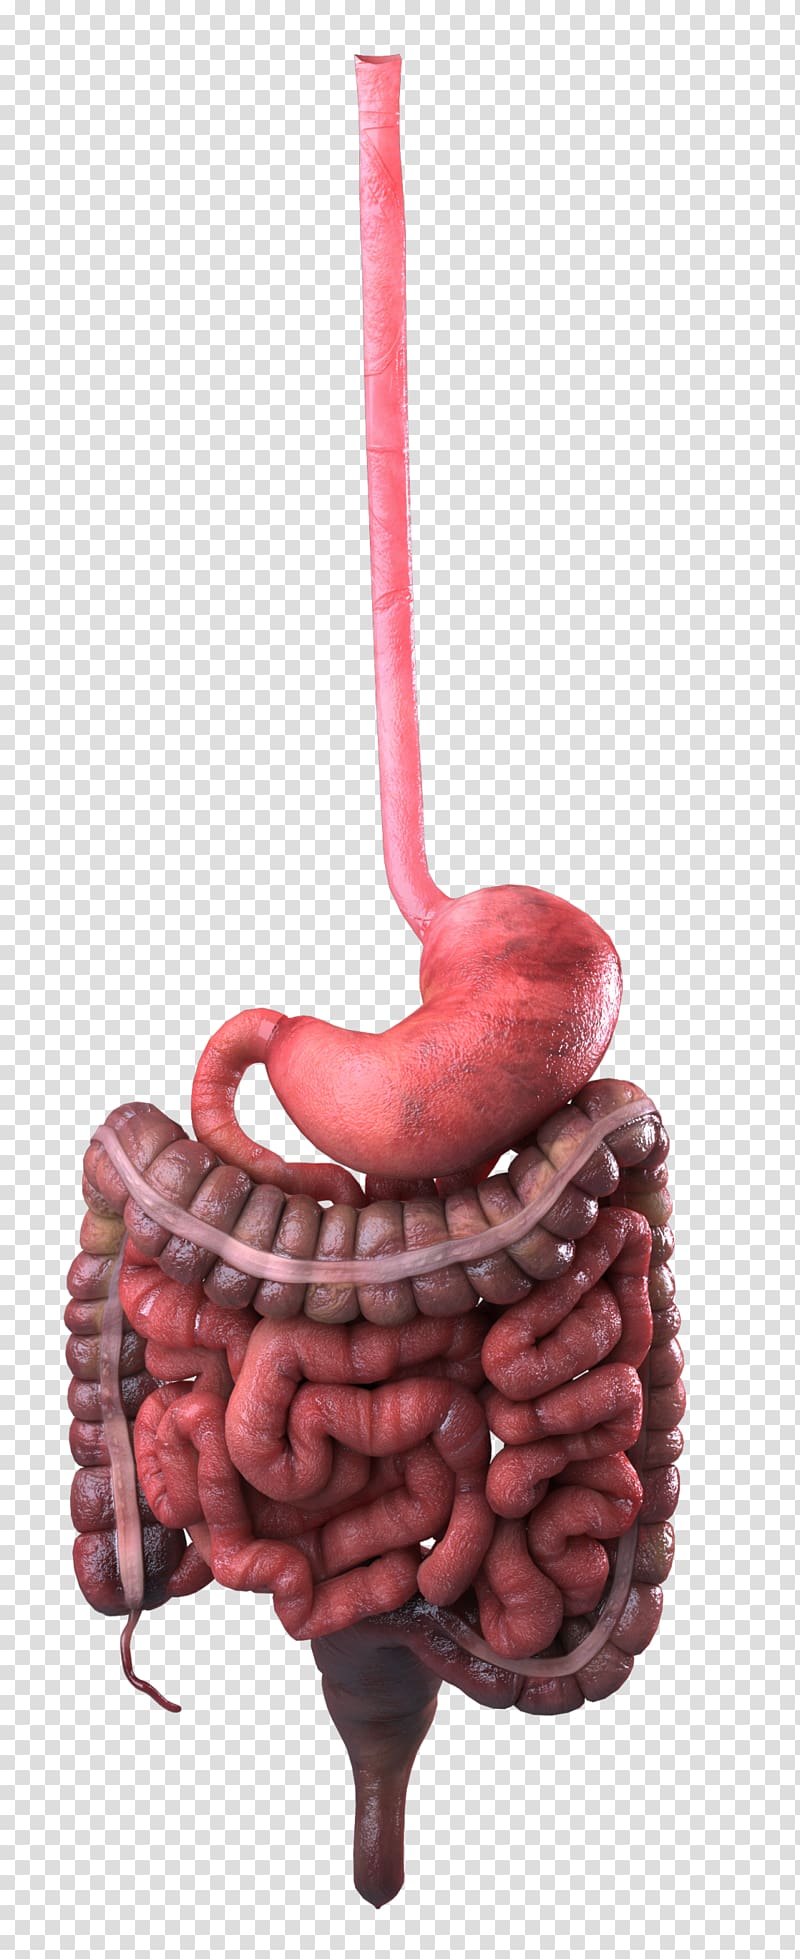 Stomach Pancreas Digestive enzyme Small intestine Gastrointestinal tract, others transparent background PNG clipart